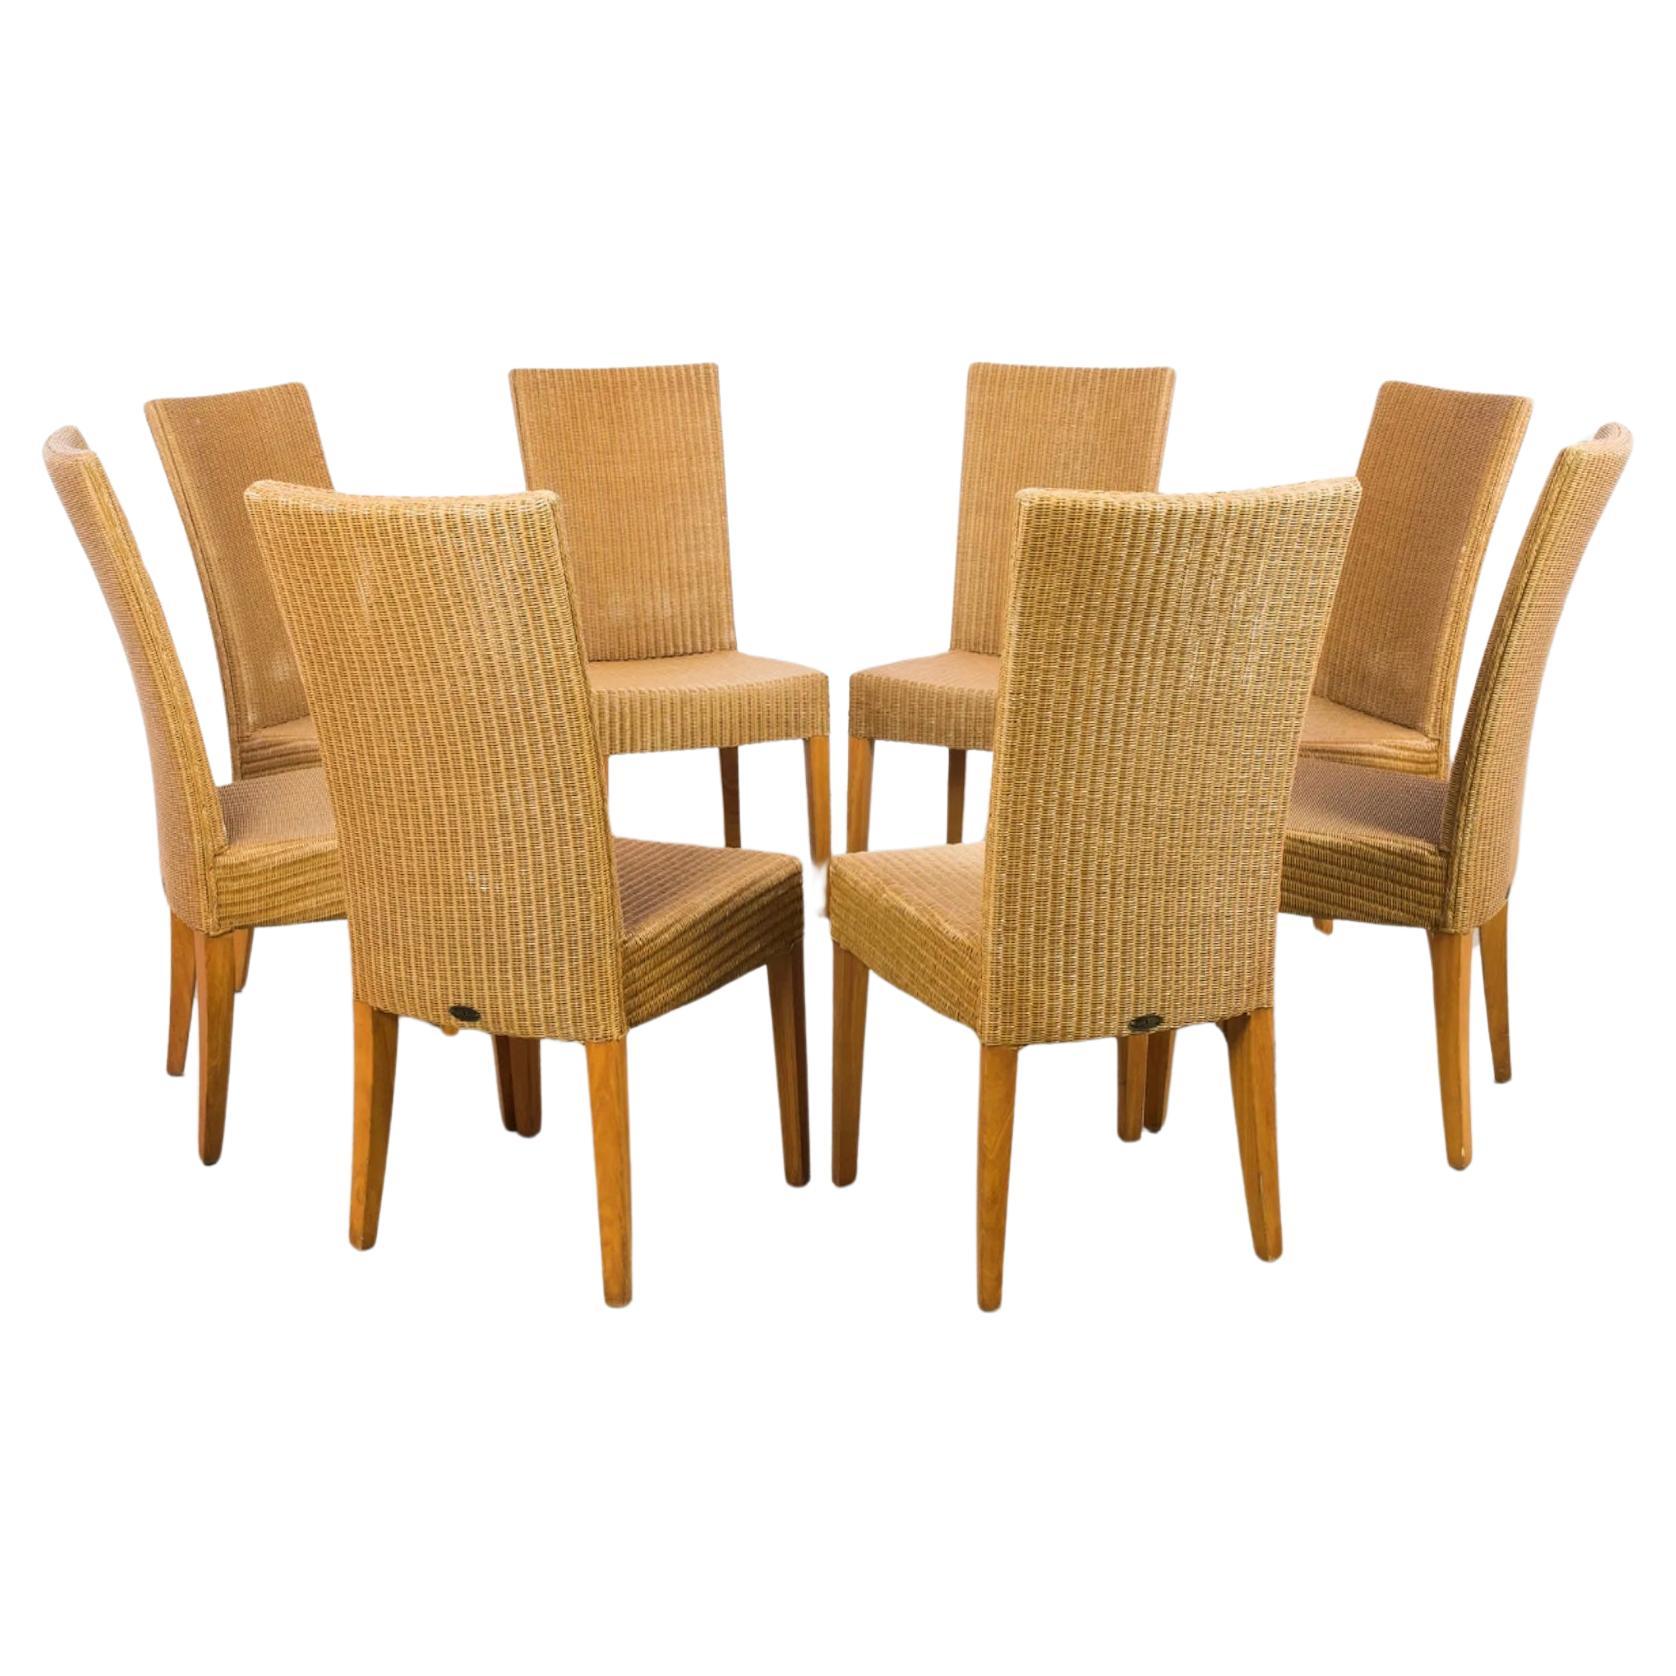 Set of 8 Vintage Lloyd Loom All Wicker Dining room chairs. All chairs are in great vintage condition. Great set of Matching chairs ready for use. Located In Brooklyn NYC.

Labeled Lloyd Loom Brass tag.

Dimensions: W 19